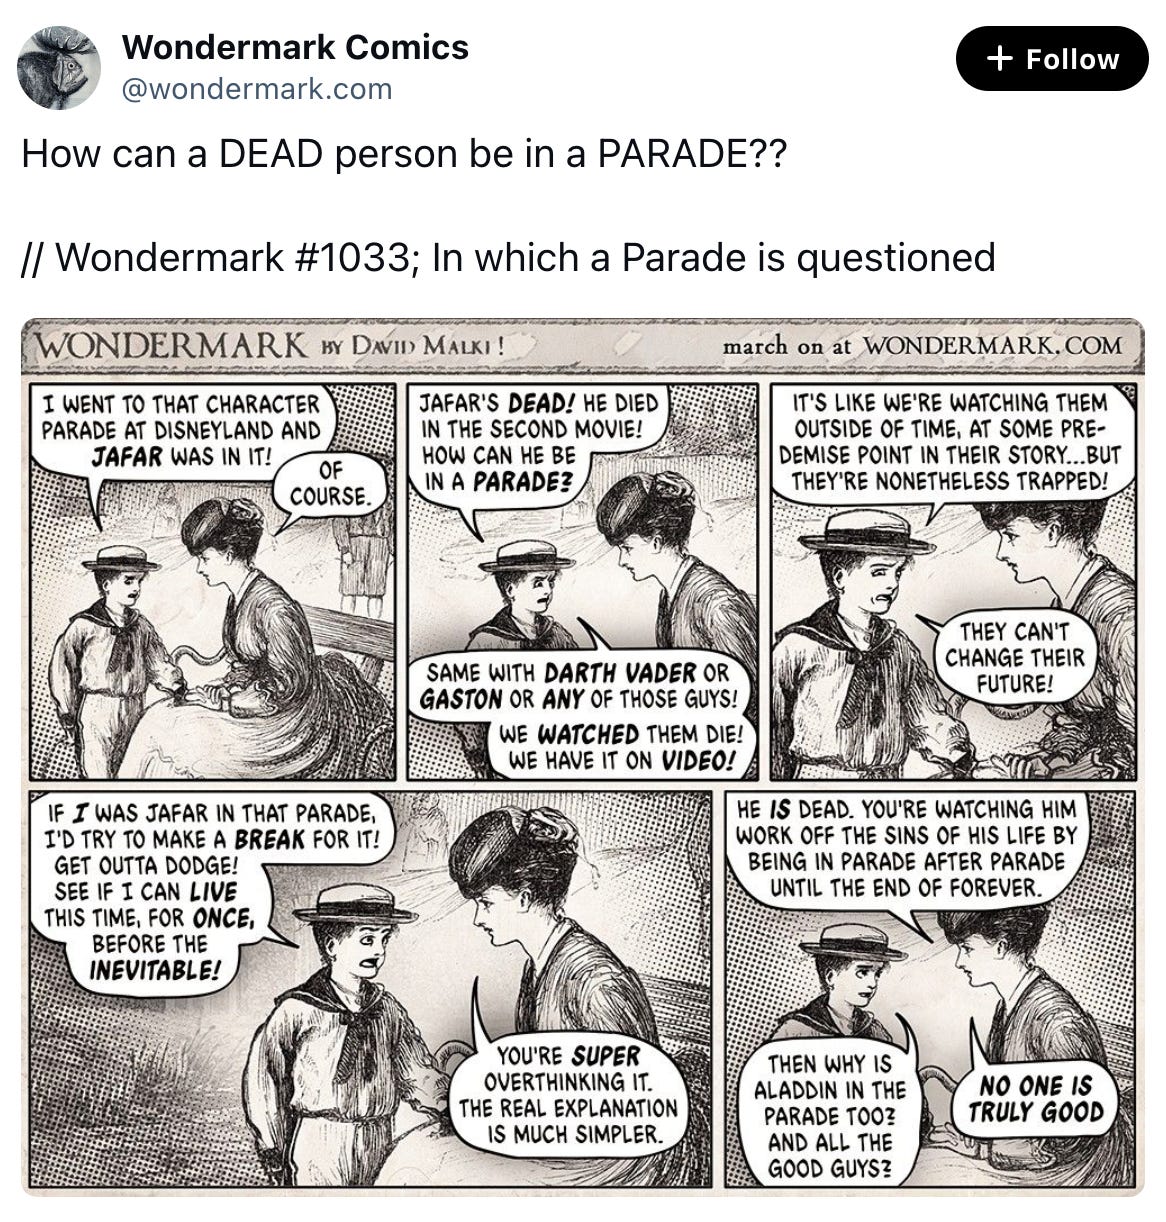  Wondermark Comics @wondermark.com How can a DEAD person be in a PARADE??  // Wondermark #1033; In which a Parade is questioned